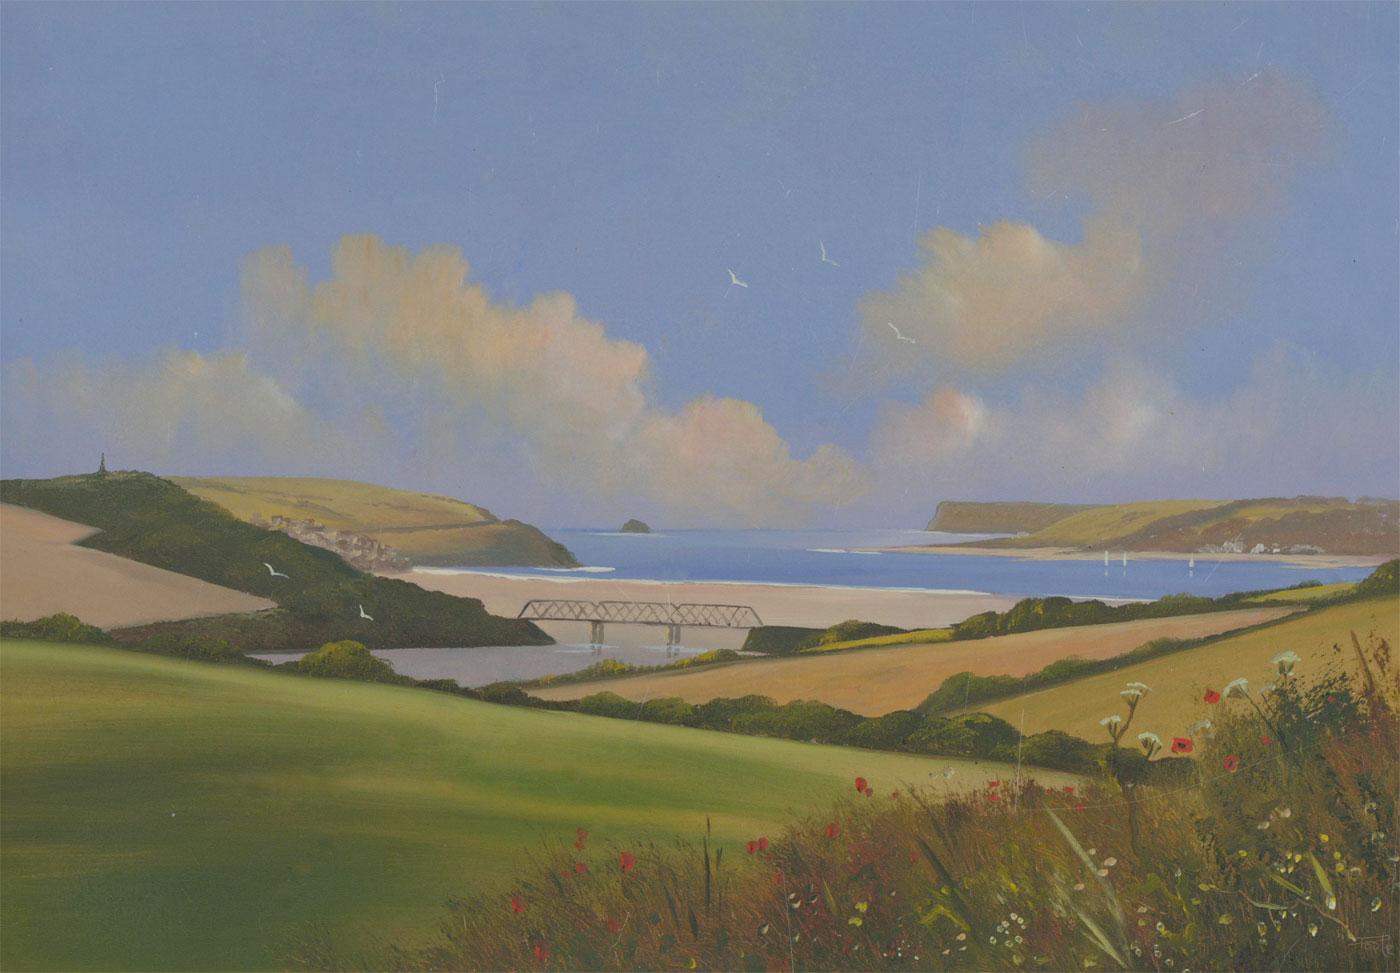 Michael J. Poole - Framed Contemporary Acrylic, Camel Estuary, Cornish Coast - Painting by Unknown